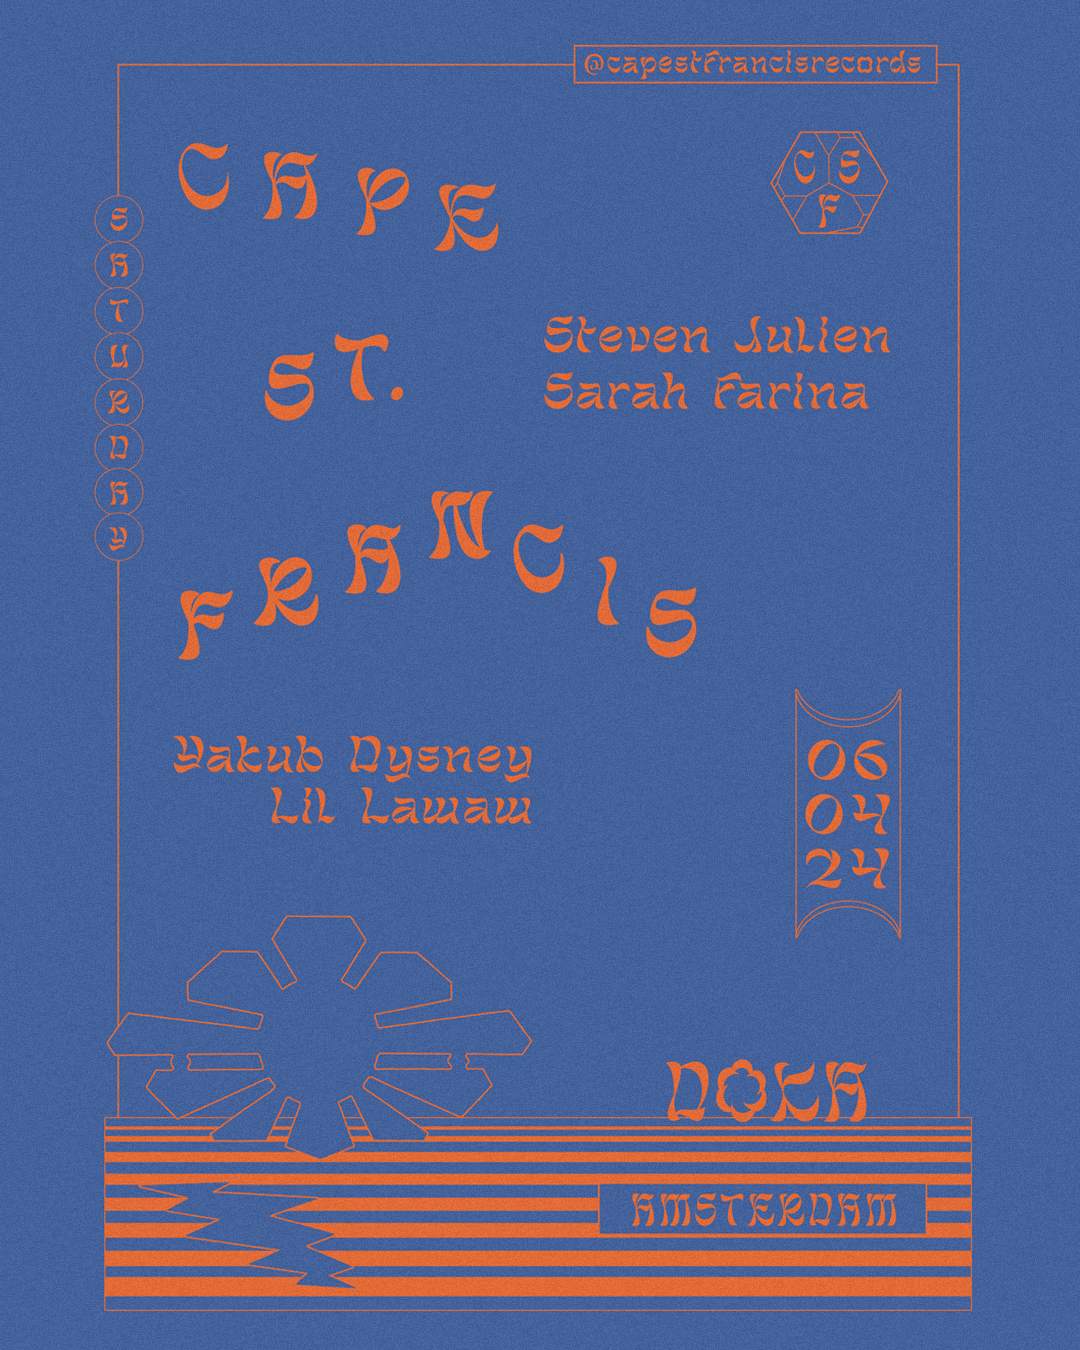 Cape St. Francis with Sarah Farina, Steven Julien, Yakub Dysney and Lil Lawaw - フライヤー裏